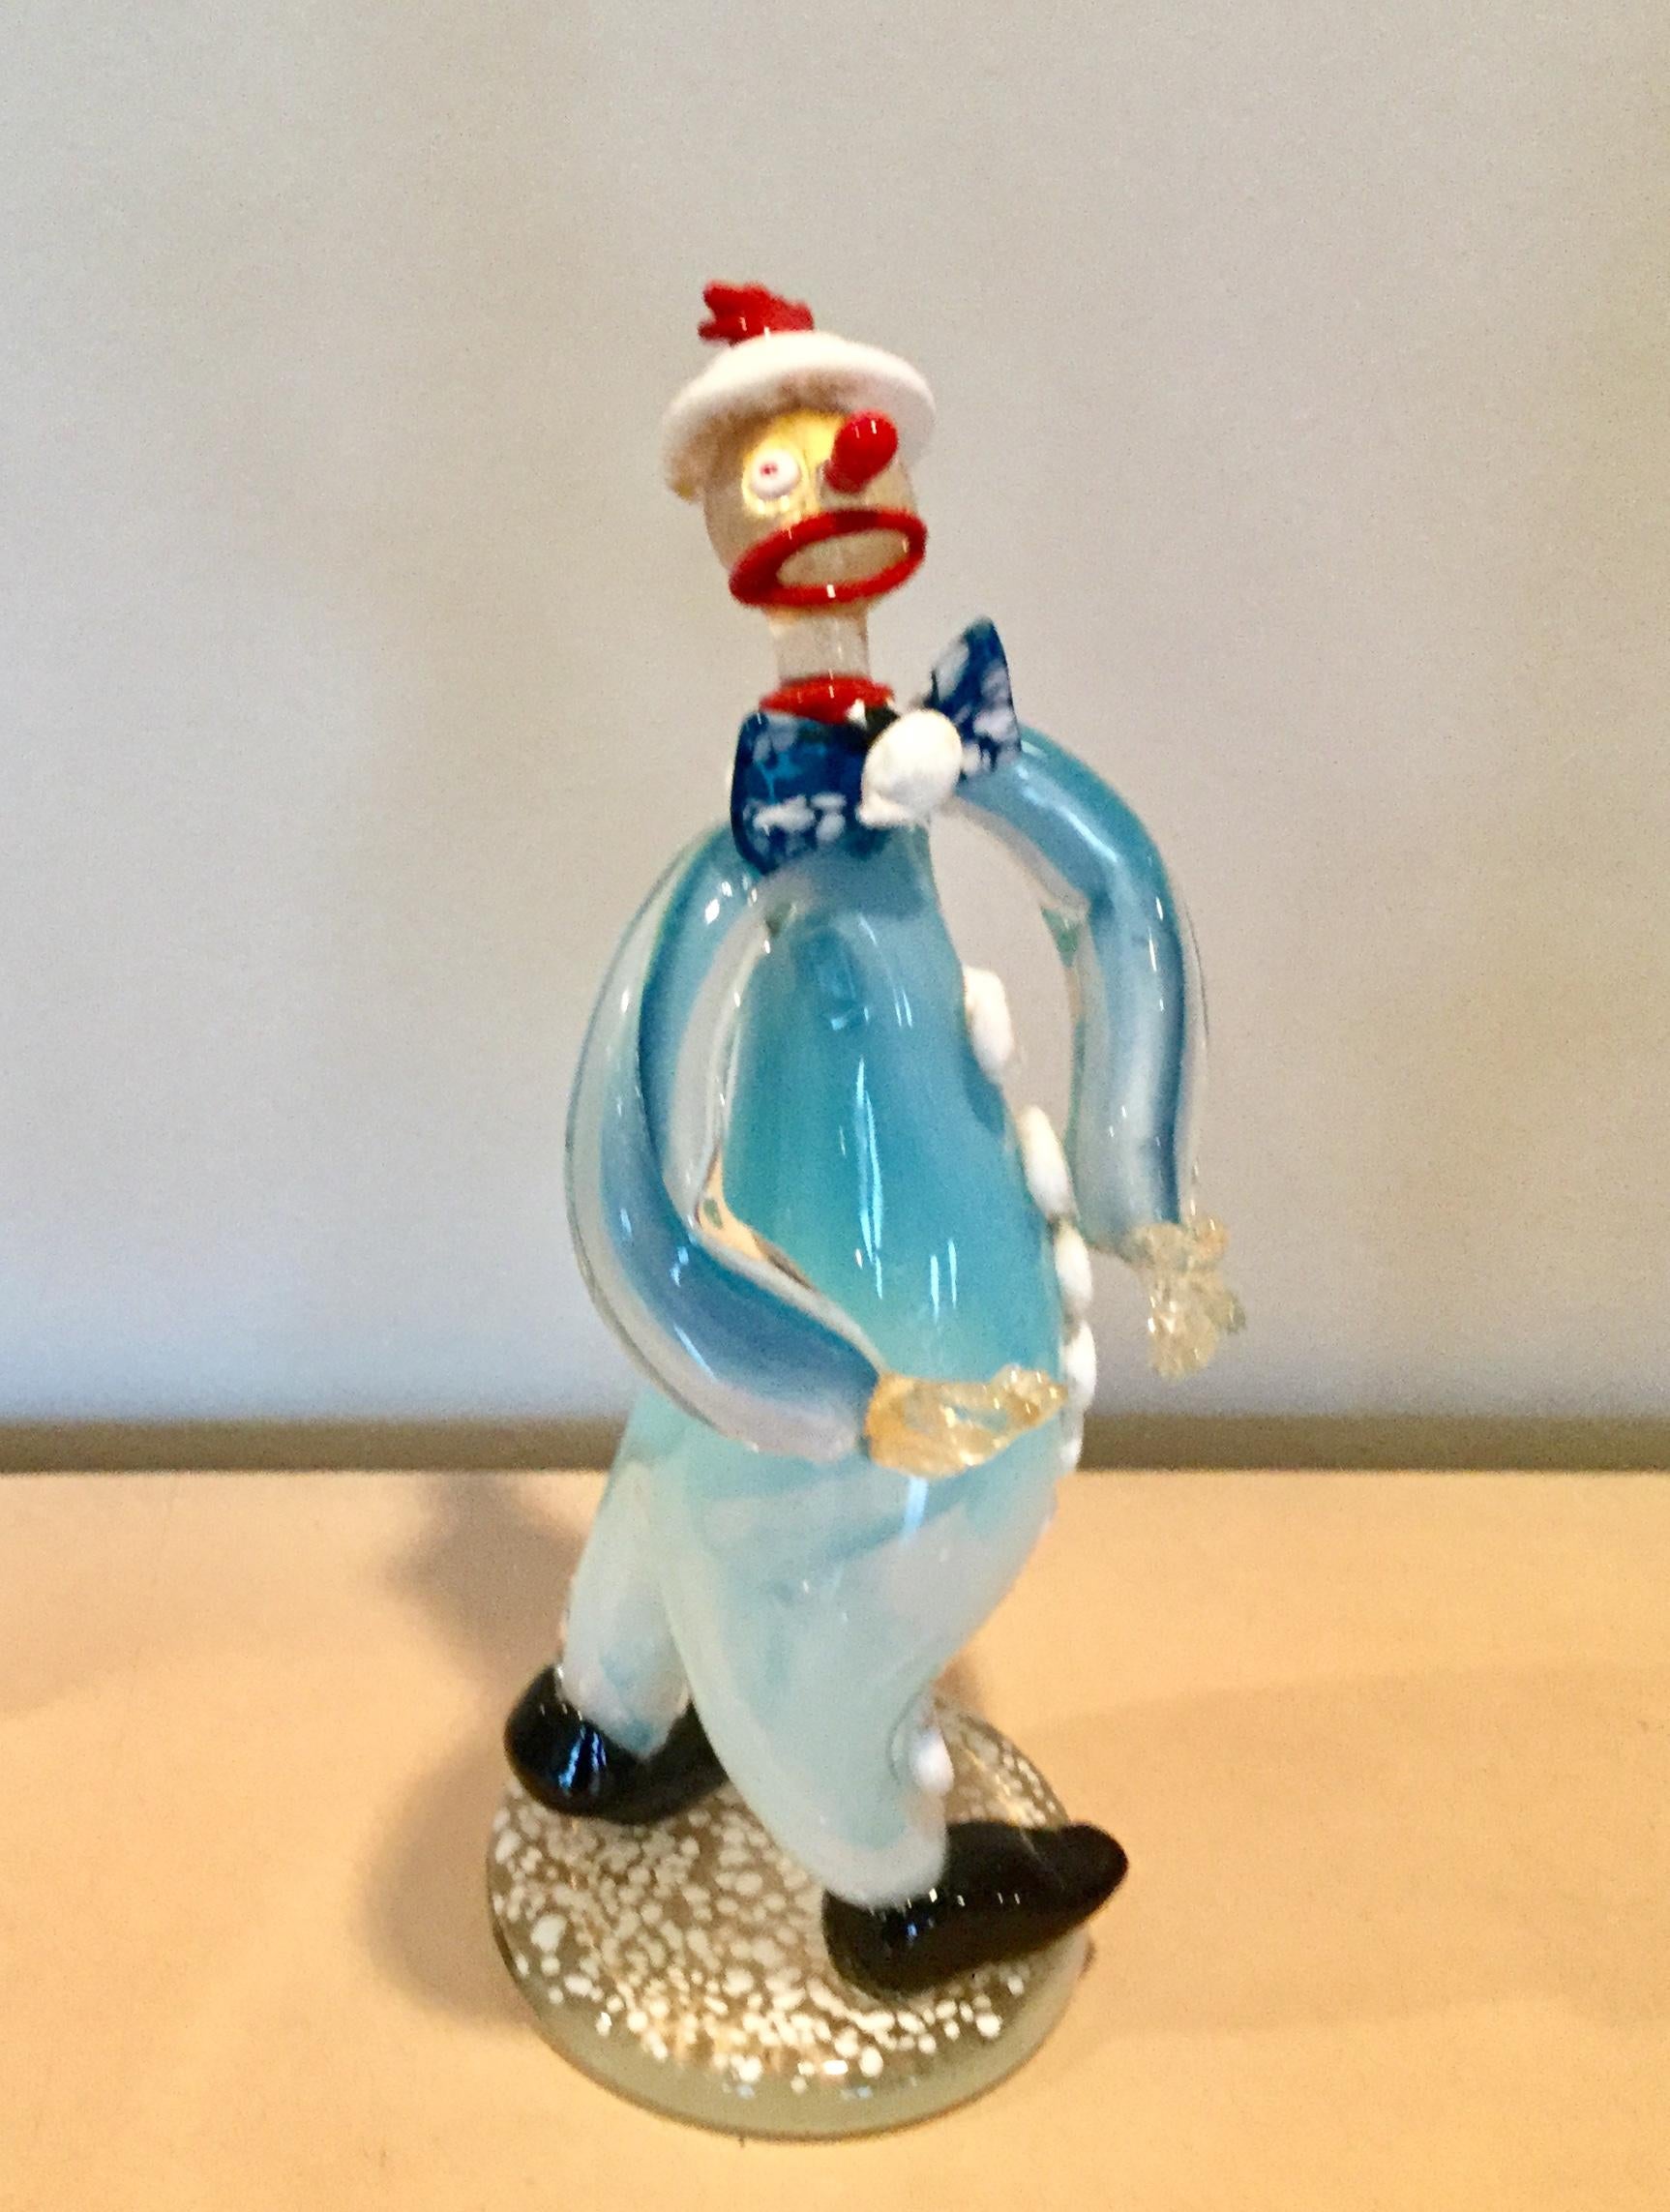 Great Fratelli Toso Murano clown with paste glass accents, circa 1940s. Rare find.